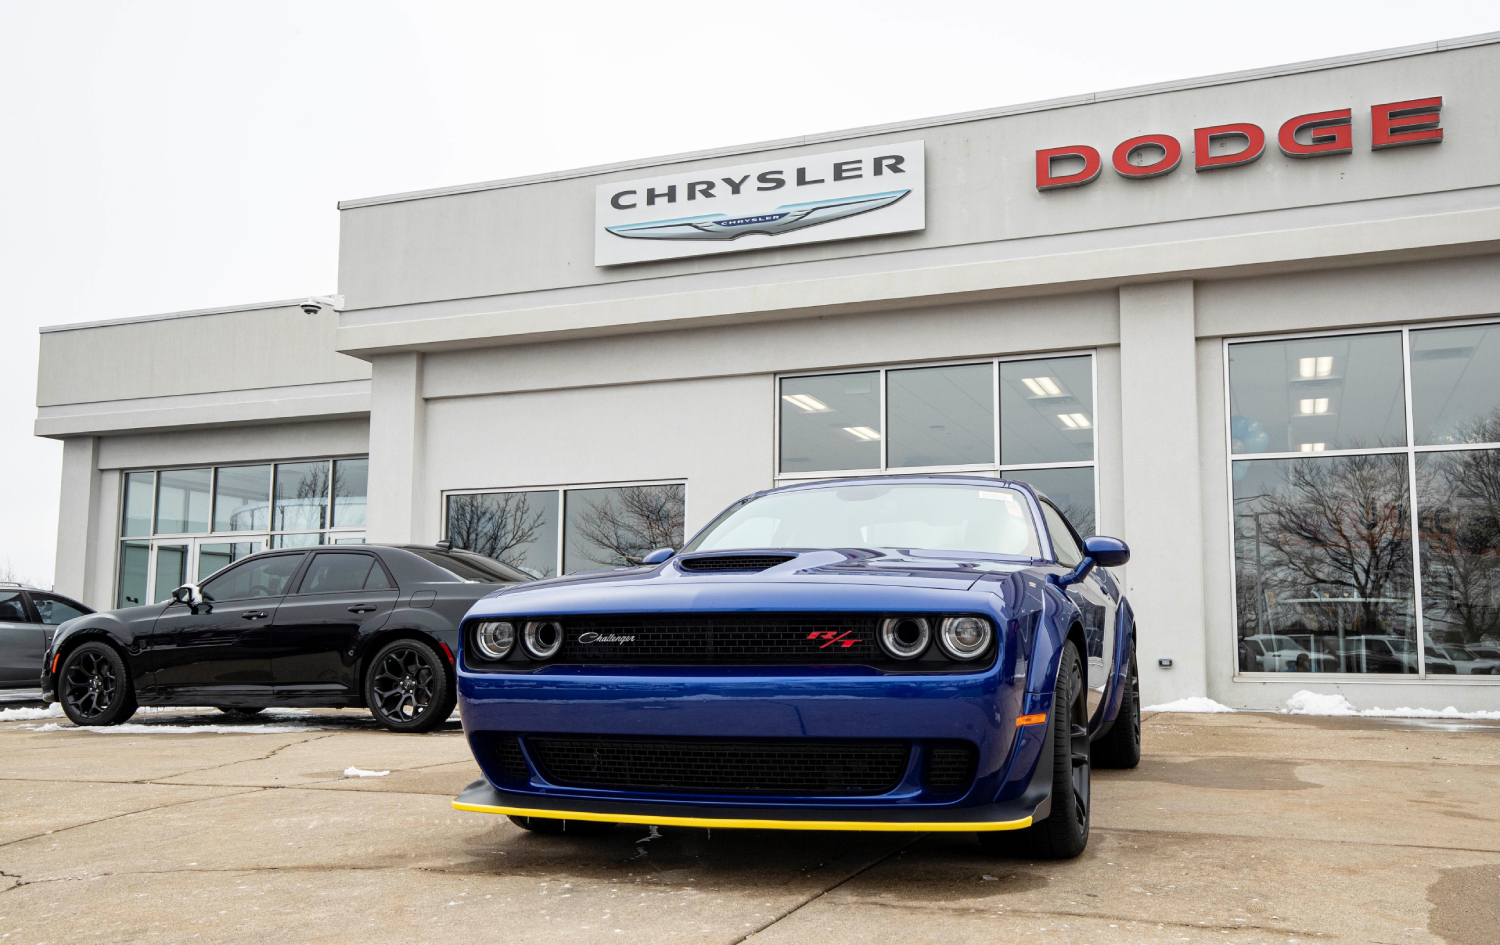 The Dodge Challenger is having a good year for sales